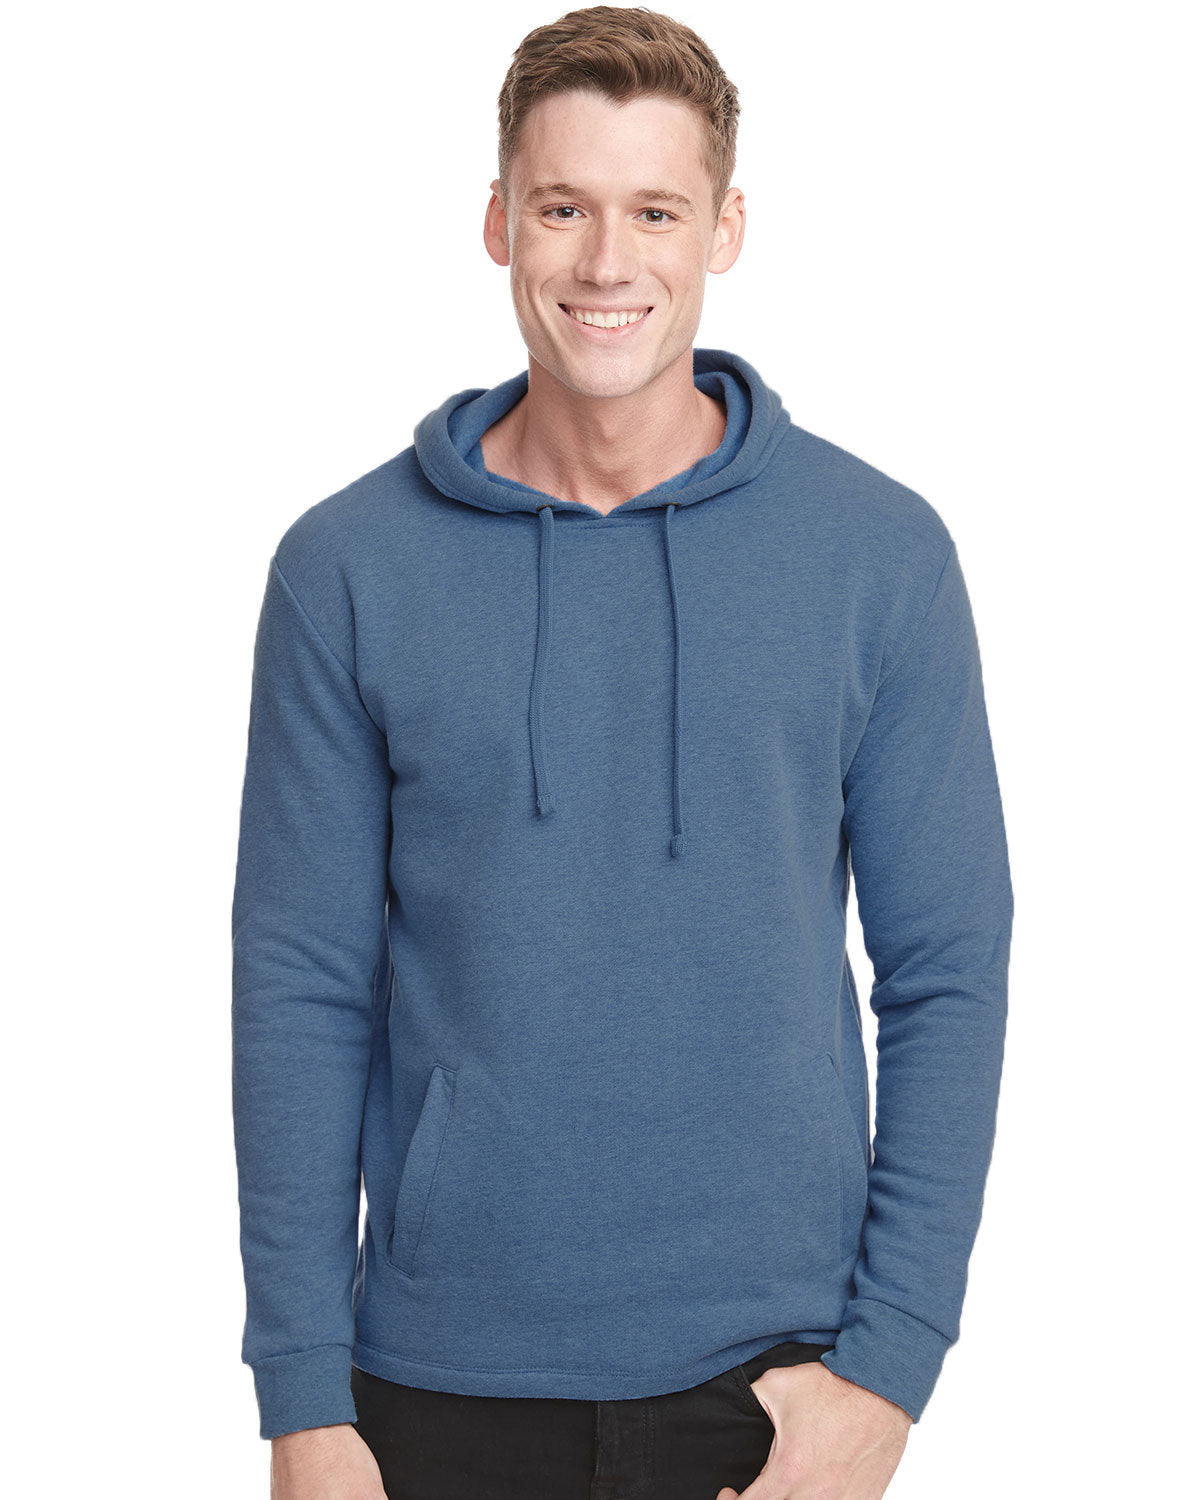 Next Level Adult PCH Pullover Hoody XS HEATHER BLACK at